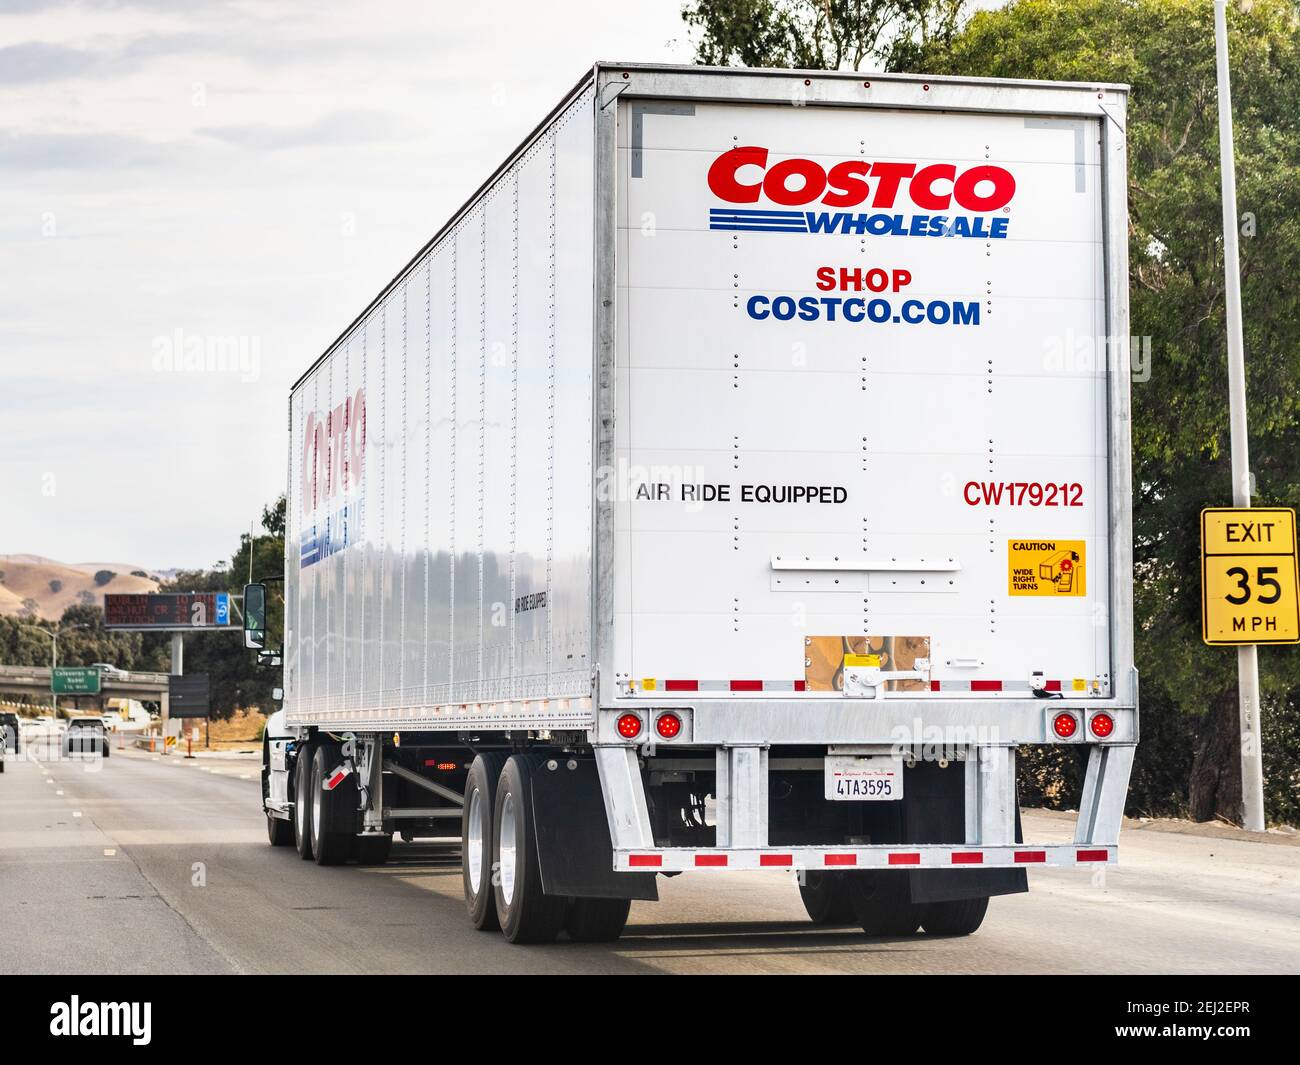 Oct 10 2020 Fremont Ca Usa Costco Wholesale Truck Driving On The Freeway In East San Francisco Bay Area 2EJ2EPR 